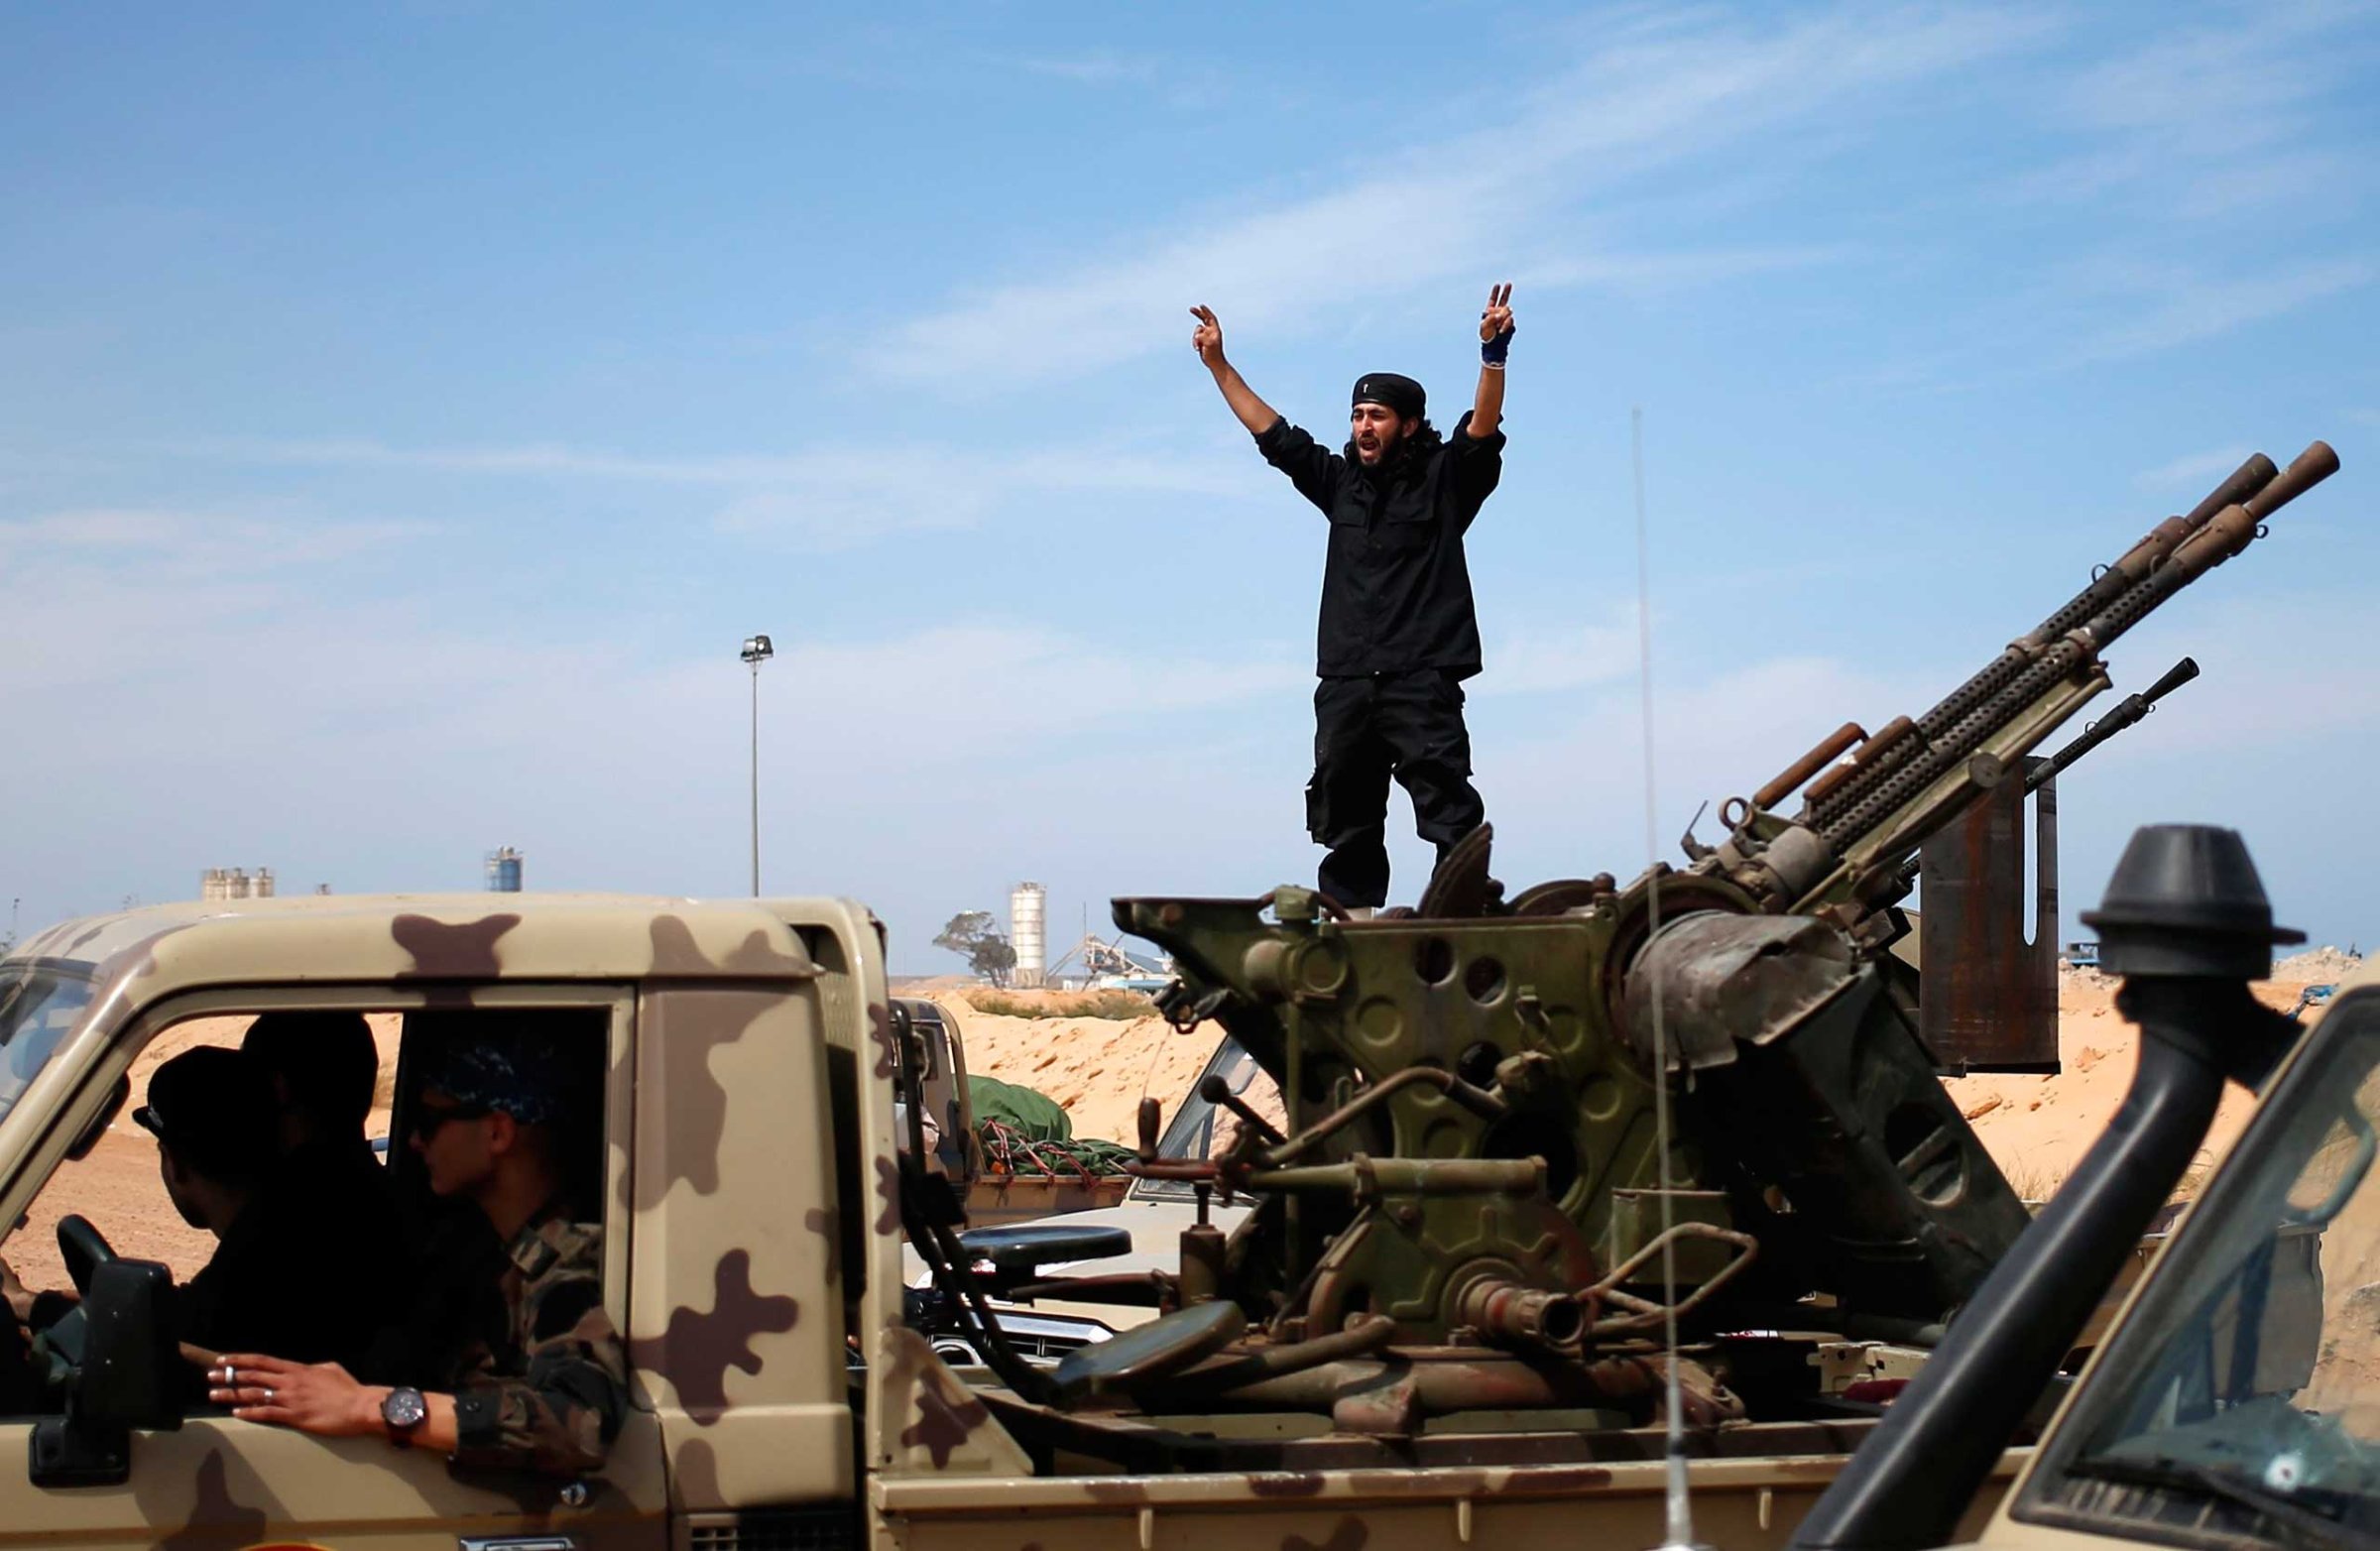 A fighter from Misrata shouts to his comrades as they move to fight ISIS militants near Sirte March 15, 2015.